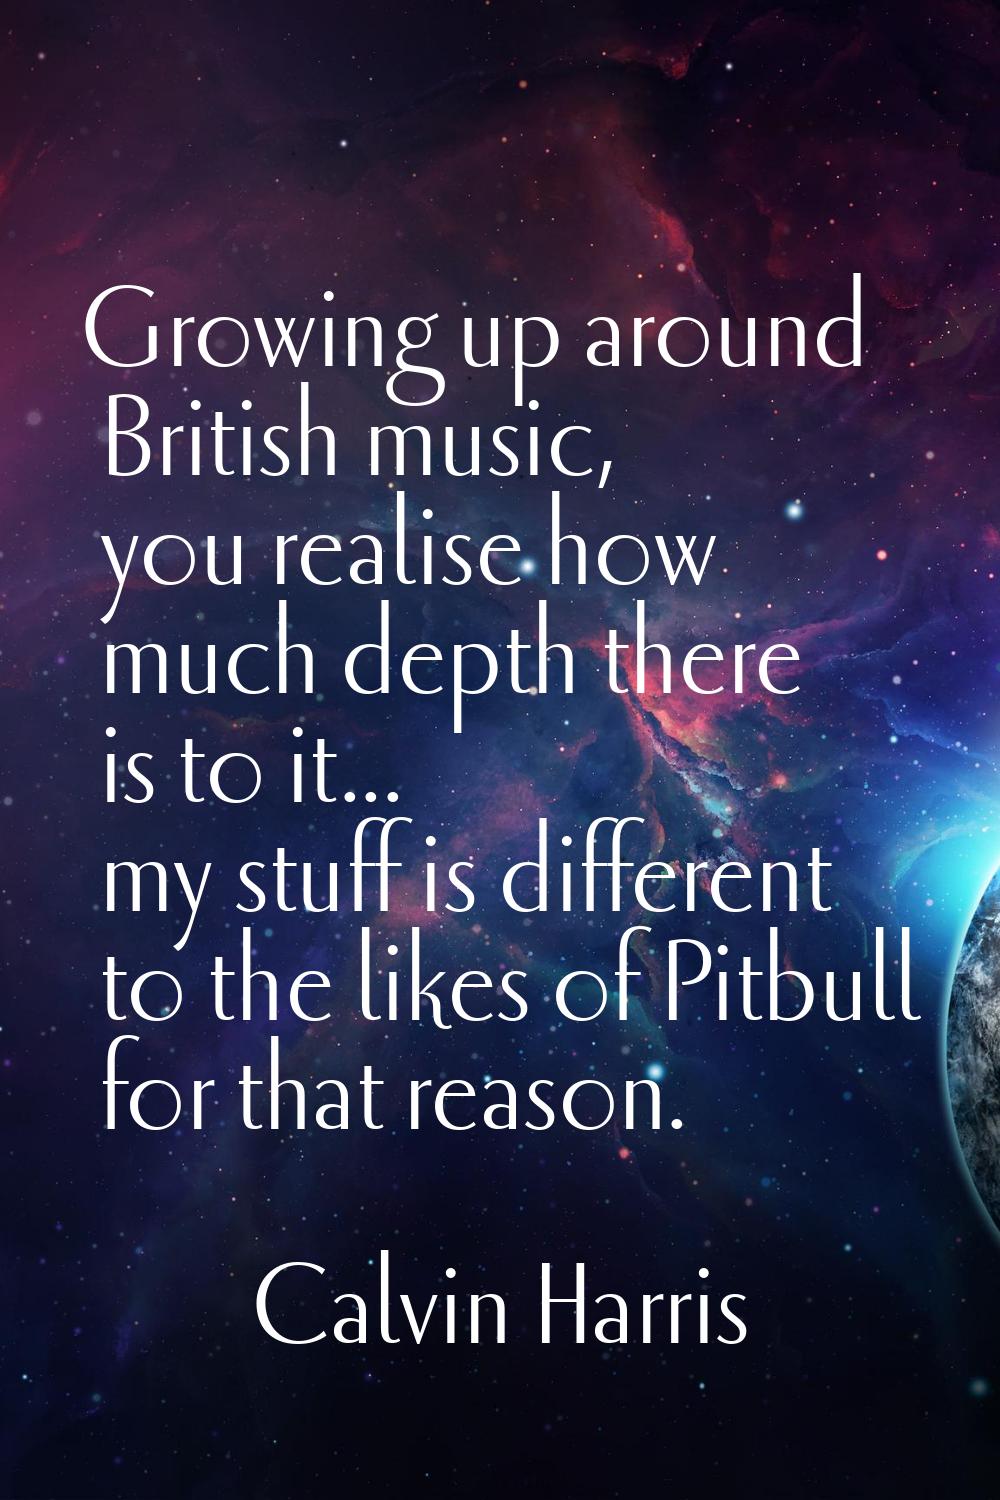 Growing up around British music, you realise how much depth there is to it... my stuff is different